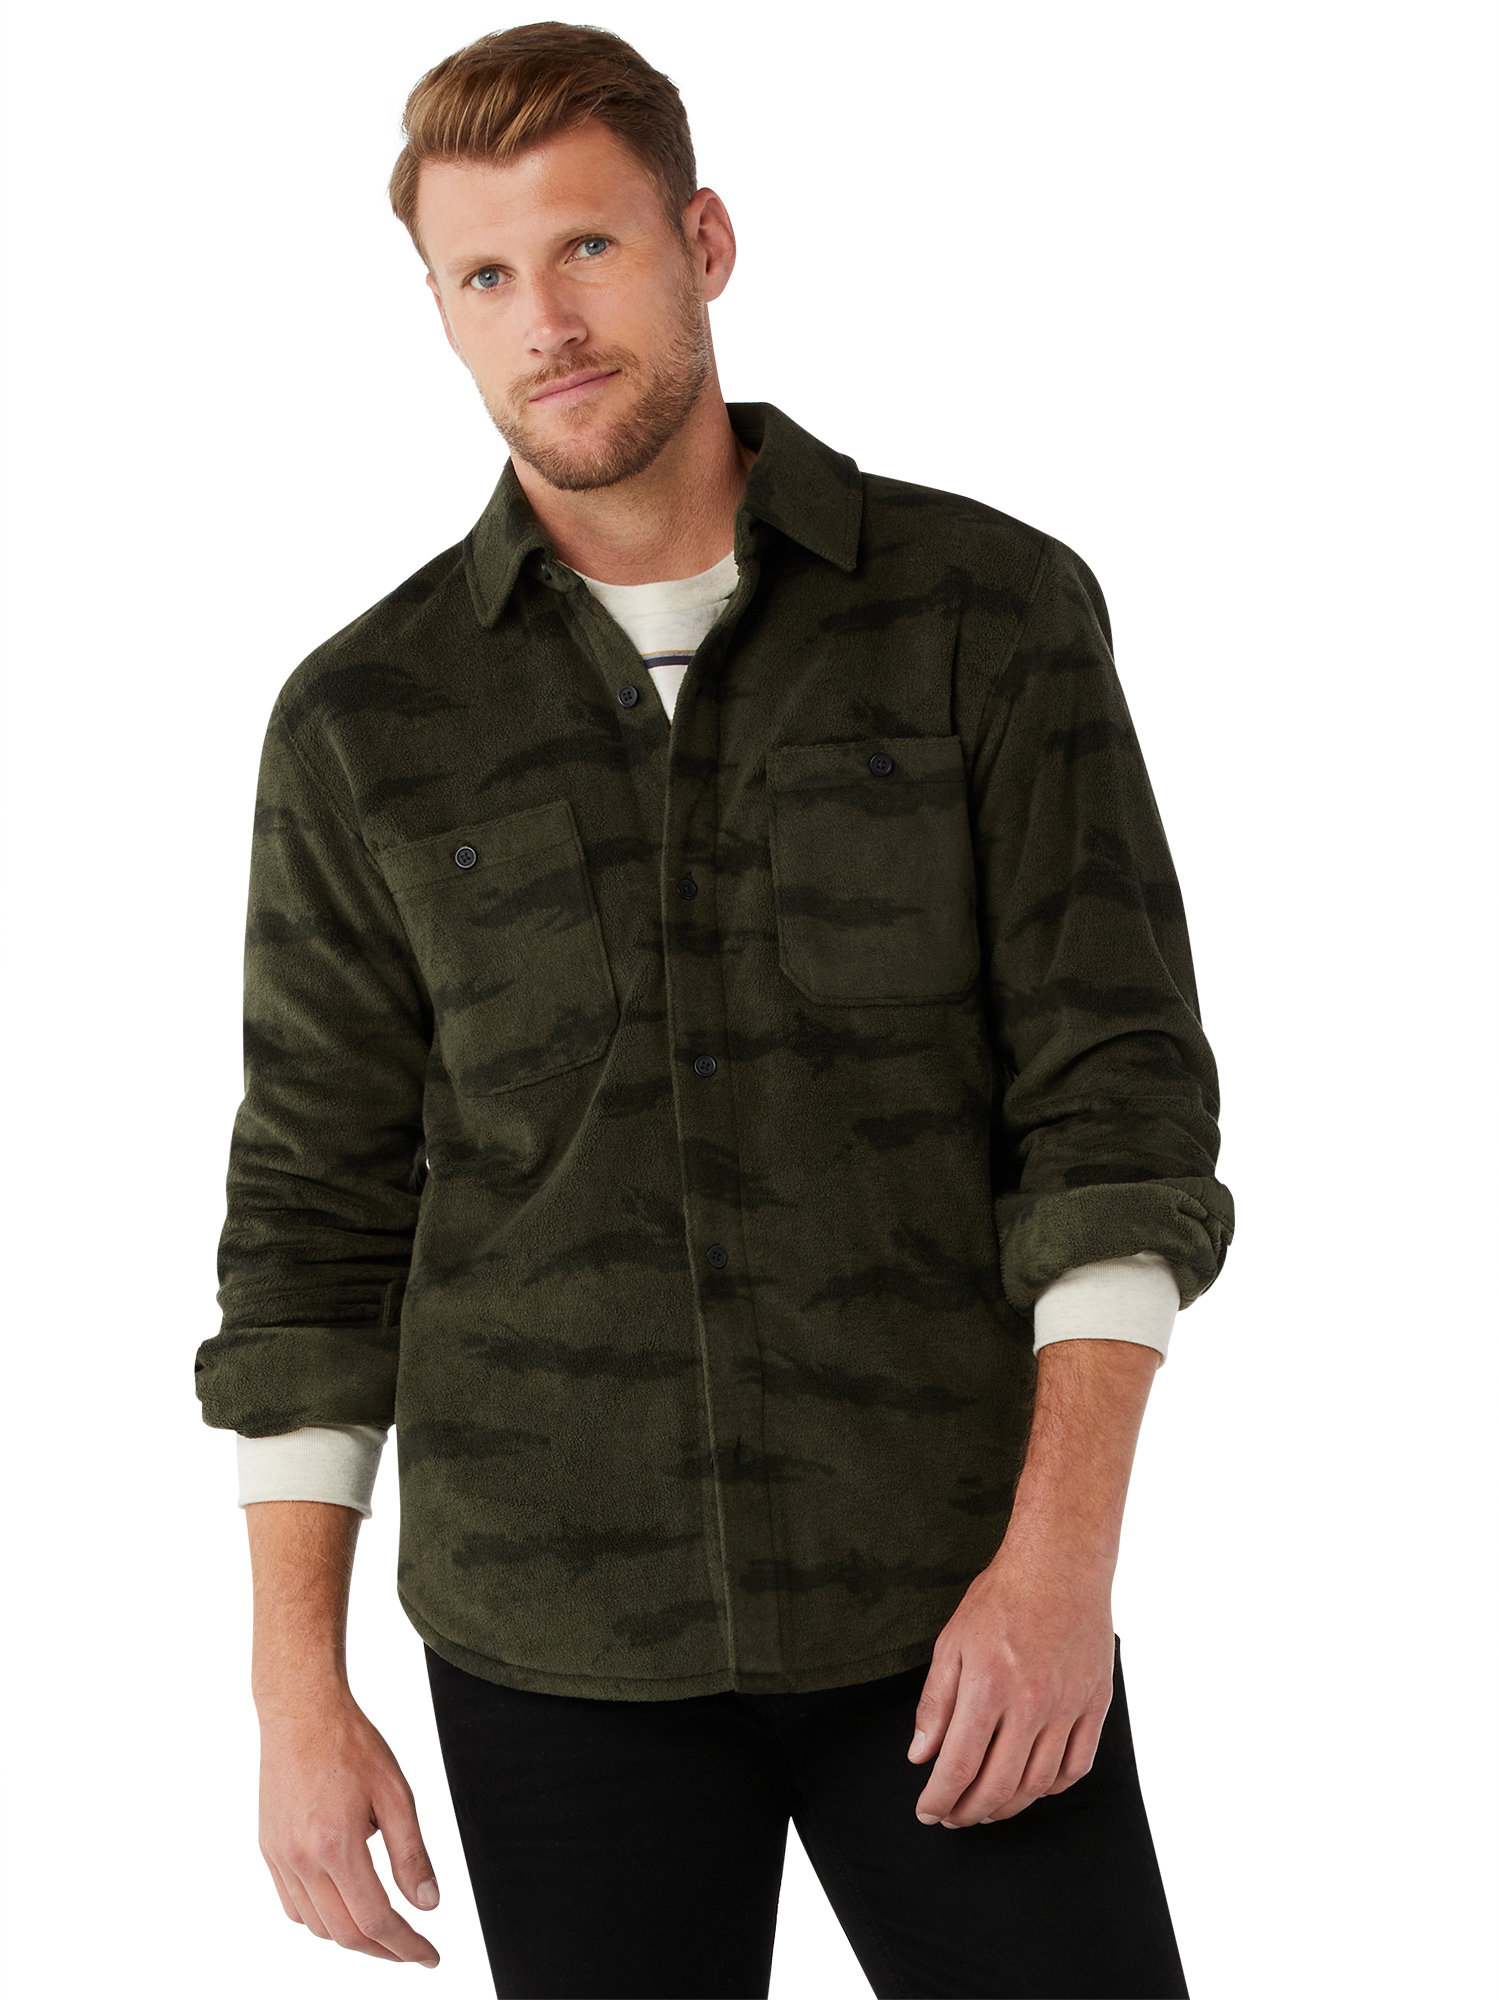 Free Assembly Men's Fleece Shirt with Two Pockets - image 1 of 6